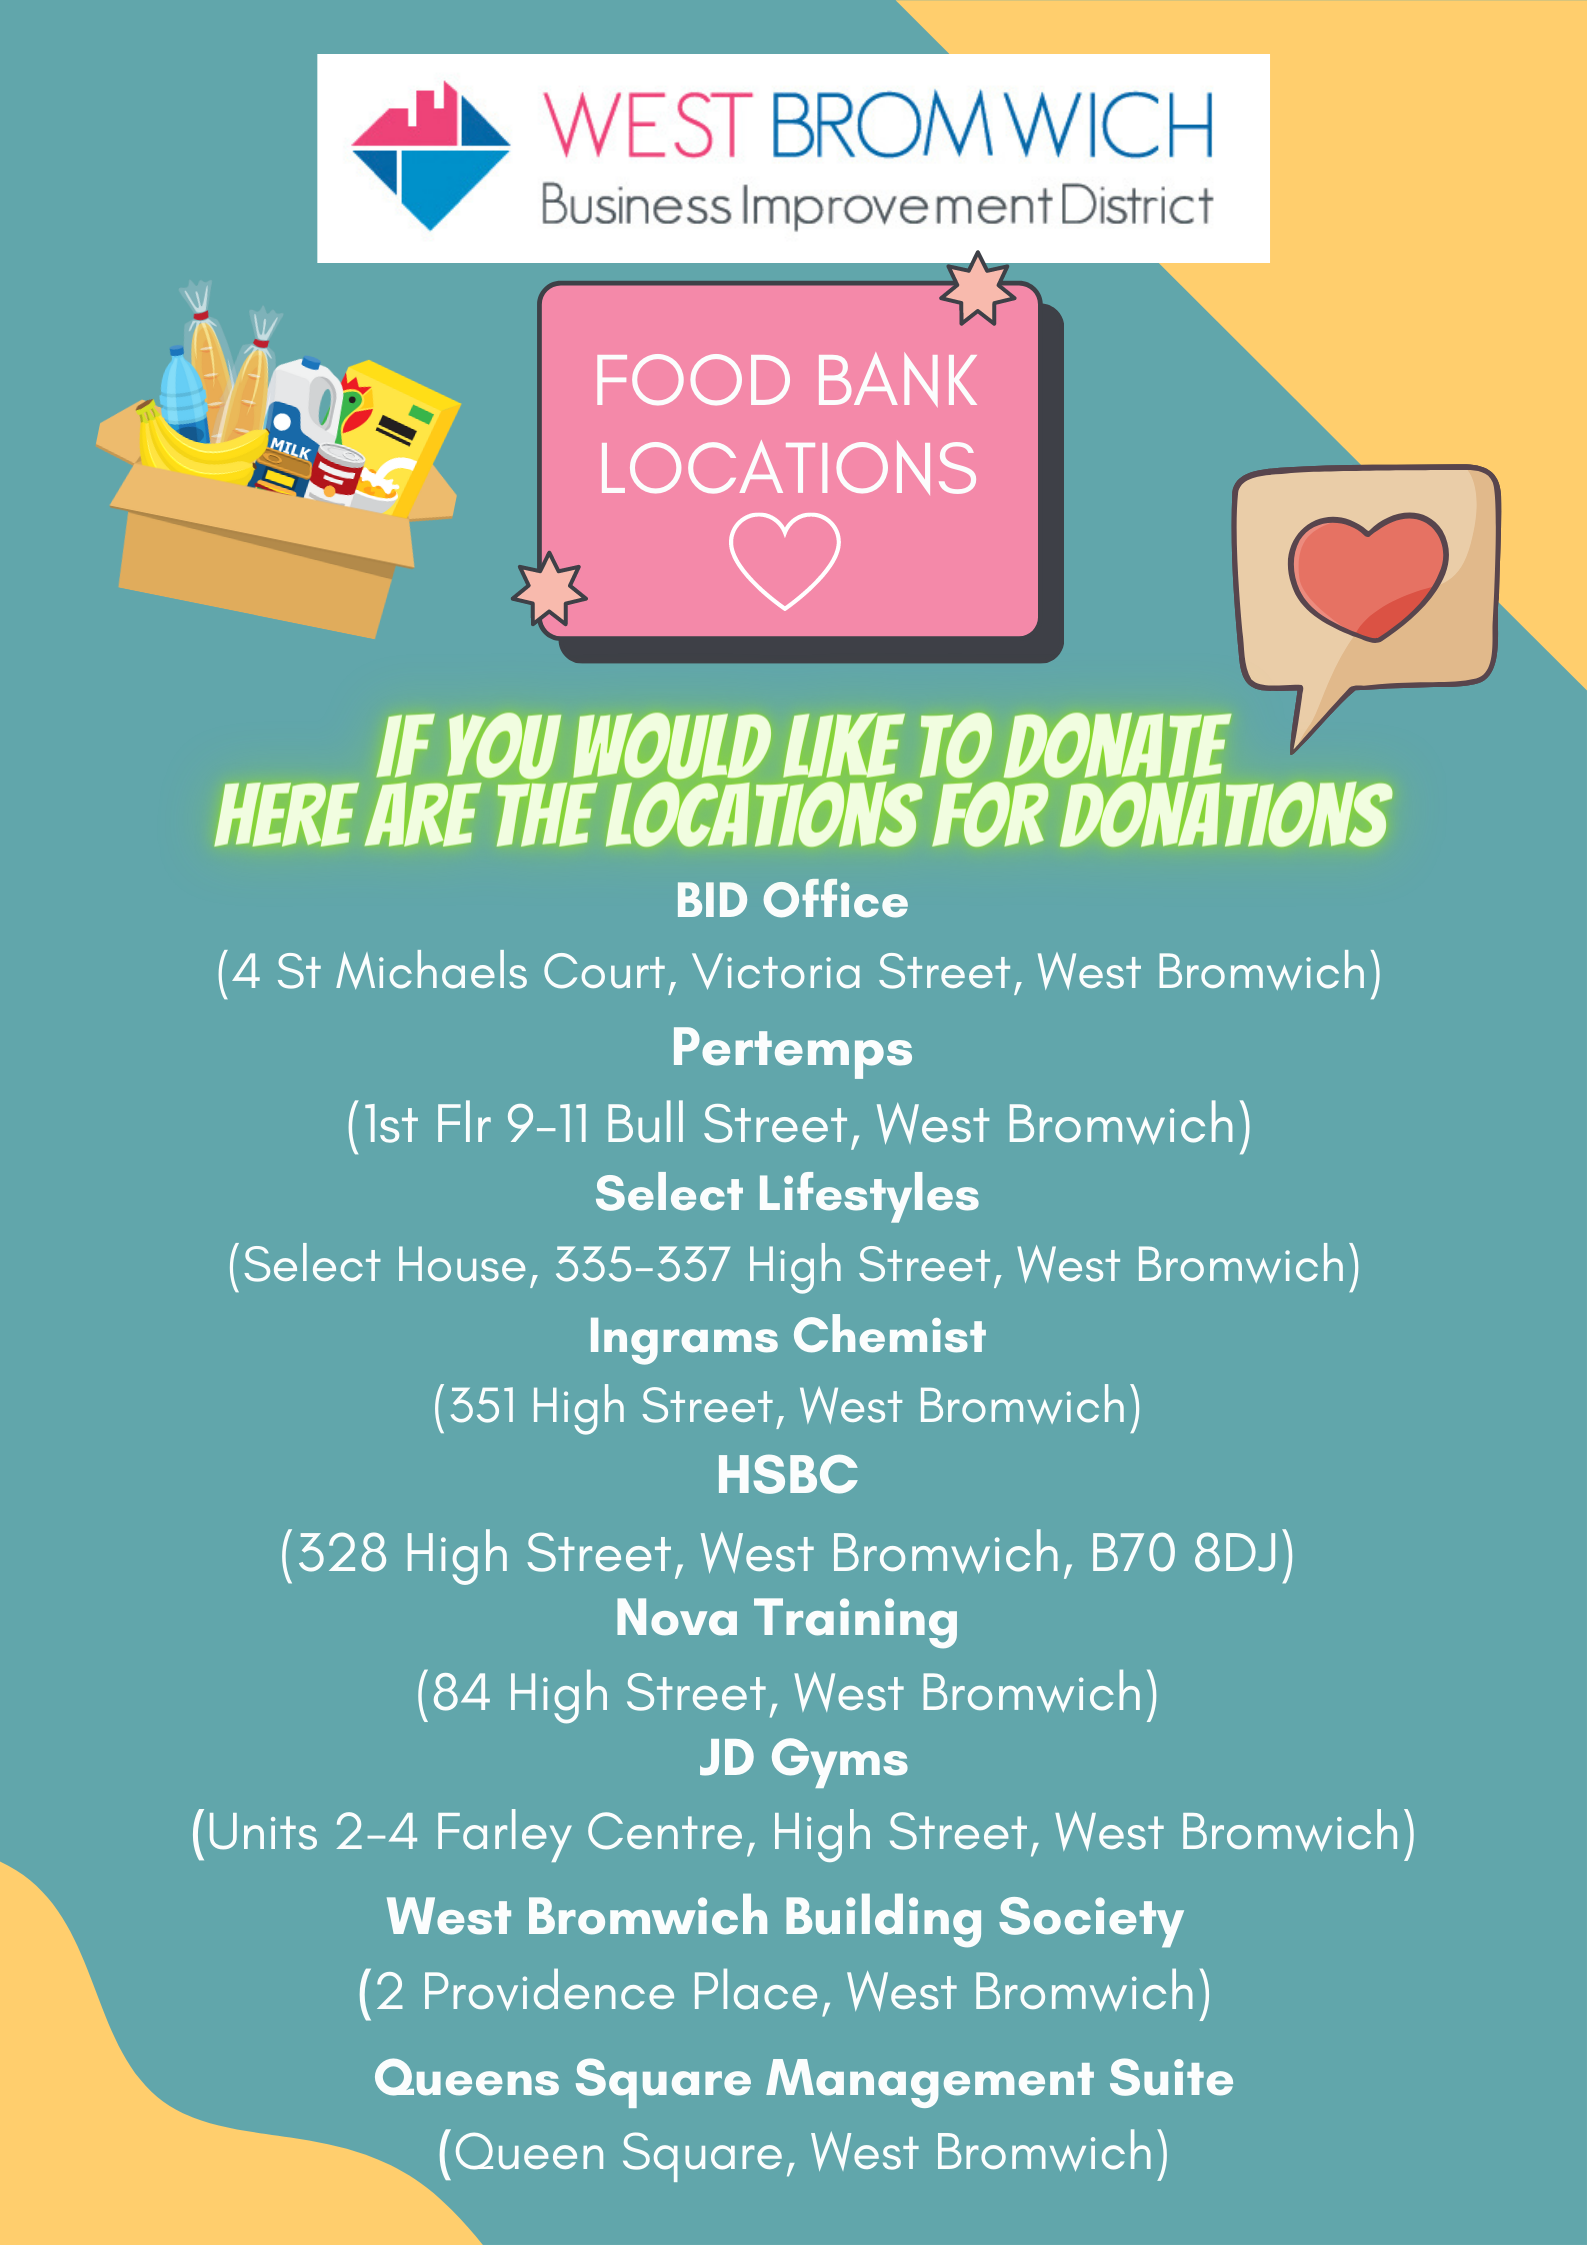 Food Bank Drive Locations for Donations